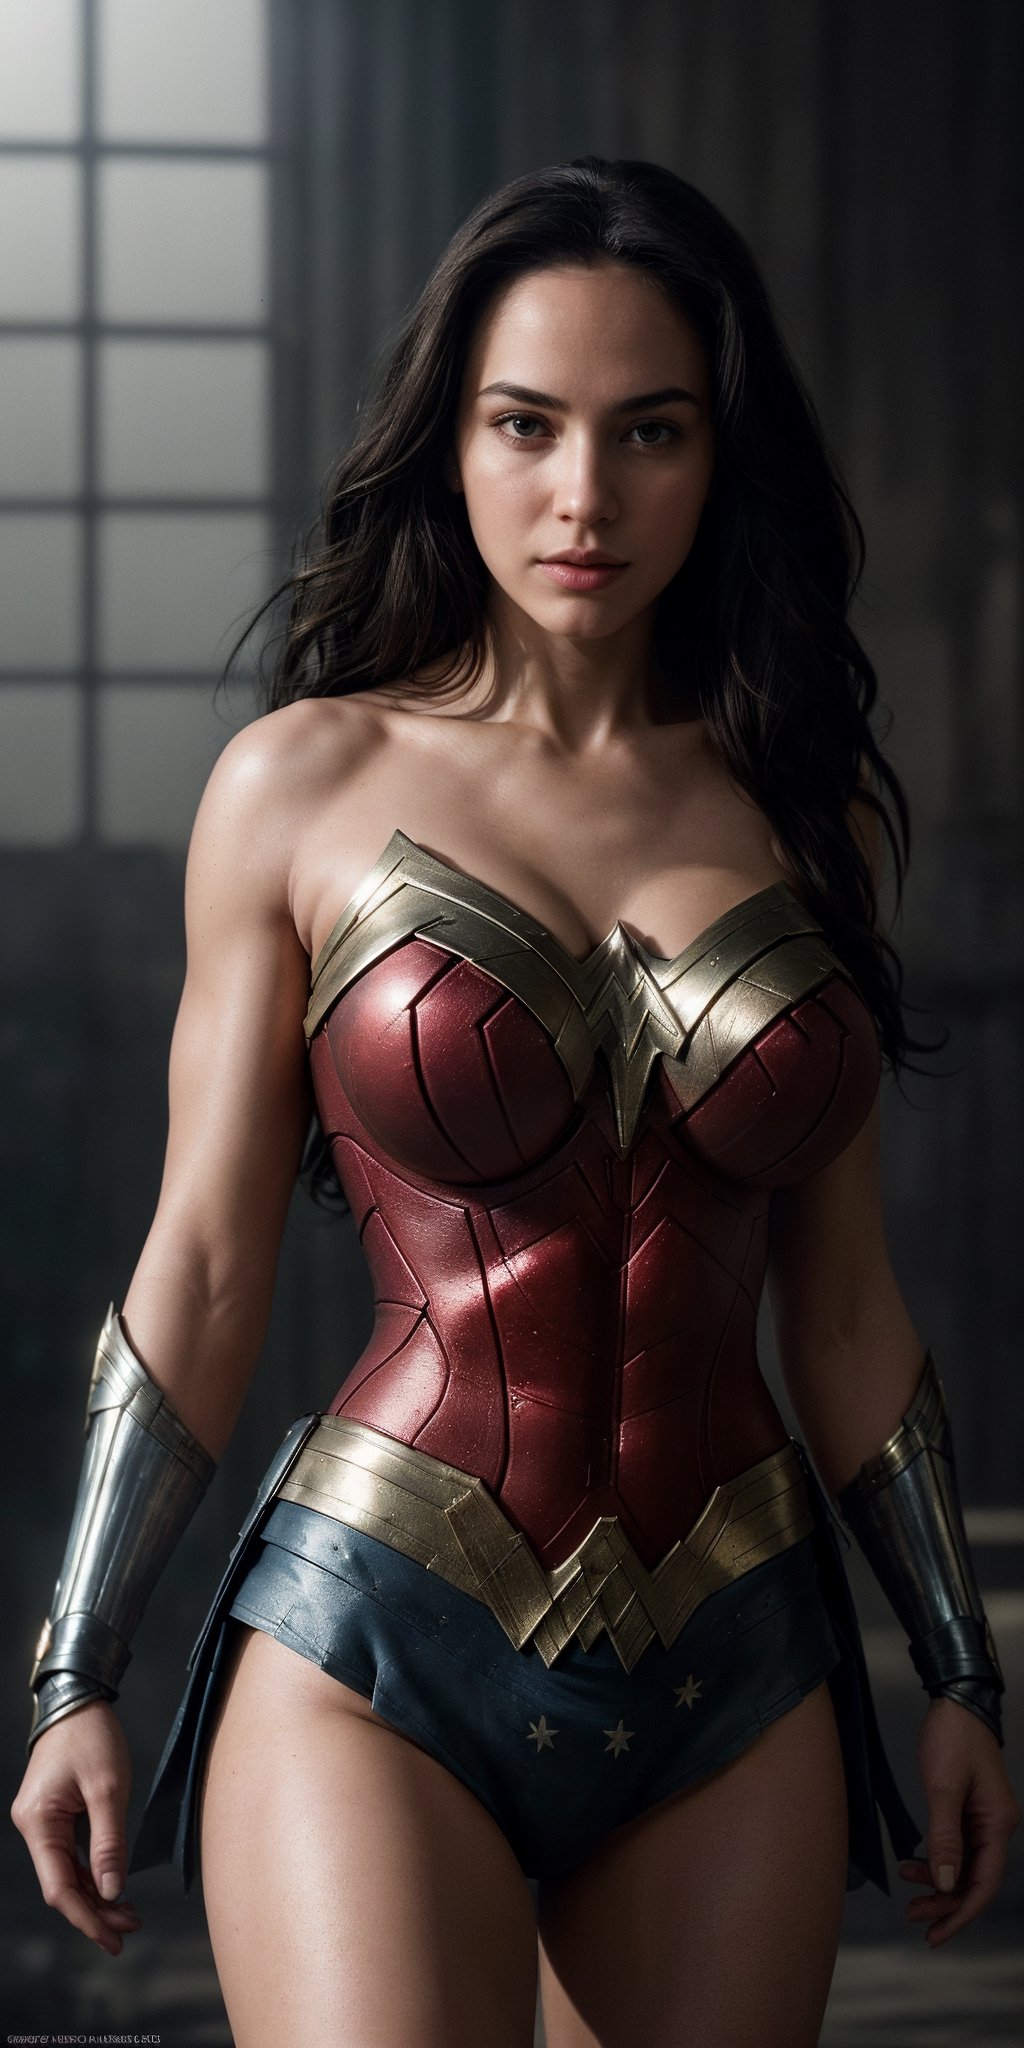 Create a highly detailed and ultra-realistic cinematic portrait of Wonder Woman, medium tits, in the style of a magazine cover. The image should exude a captivating and dramatic atmosphere, with as the central focus. Pay special attention to their facial features, clothing, and overall appearance, ensuring that every detail is meticulously rendered for maximum realism. The lighting should be expertly crafted to create depth and dimension, with a careful balance of highlights and shadows to bring out the best in features. The background should complement the subject without overshadowing them, adding to the overall cinematic feel of the image. 